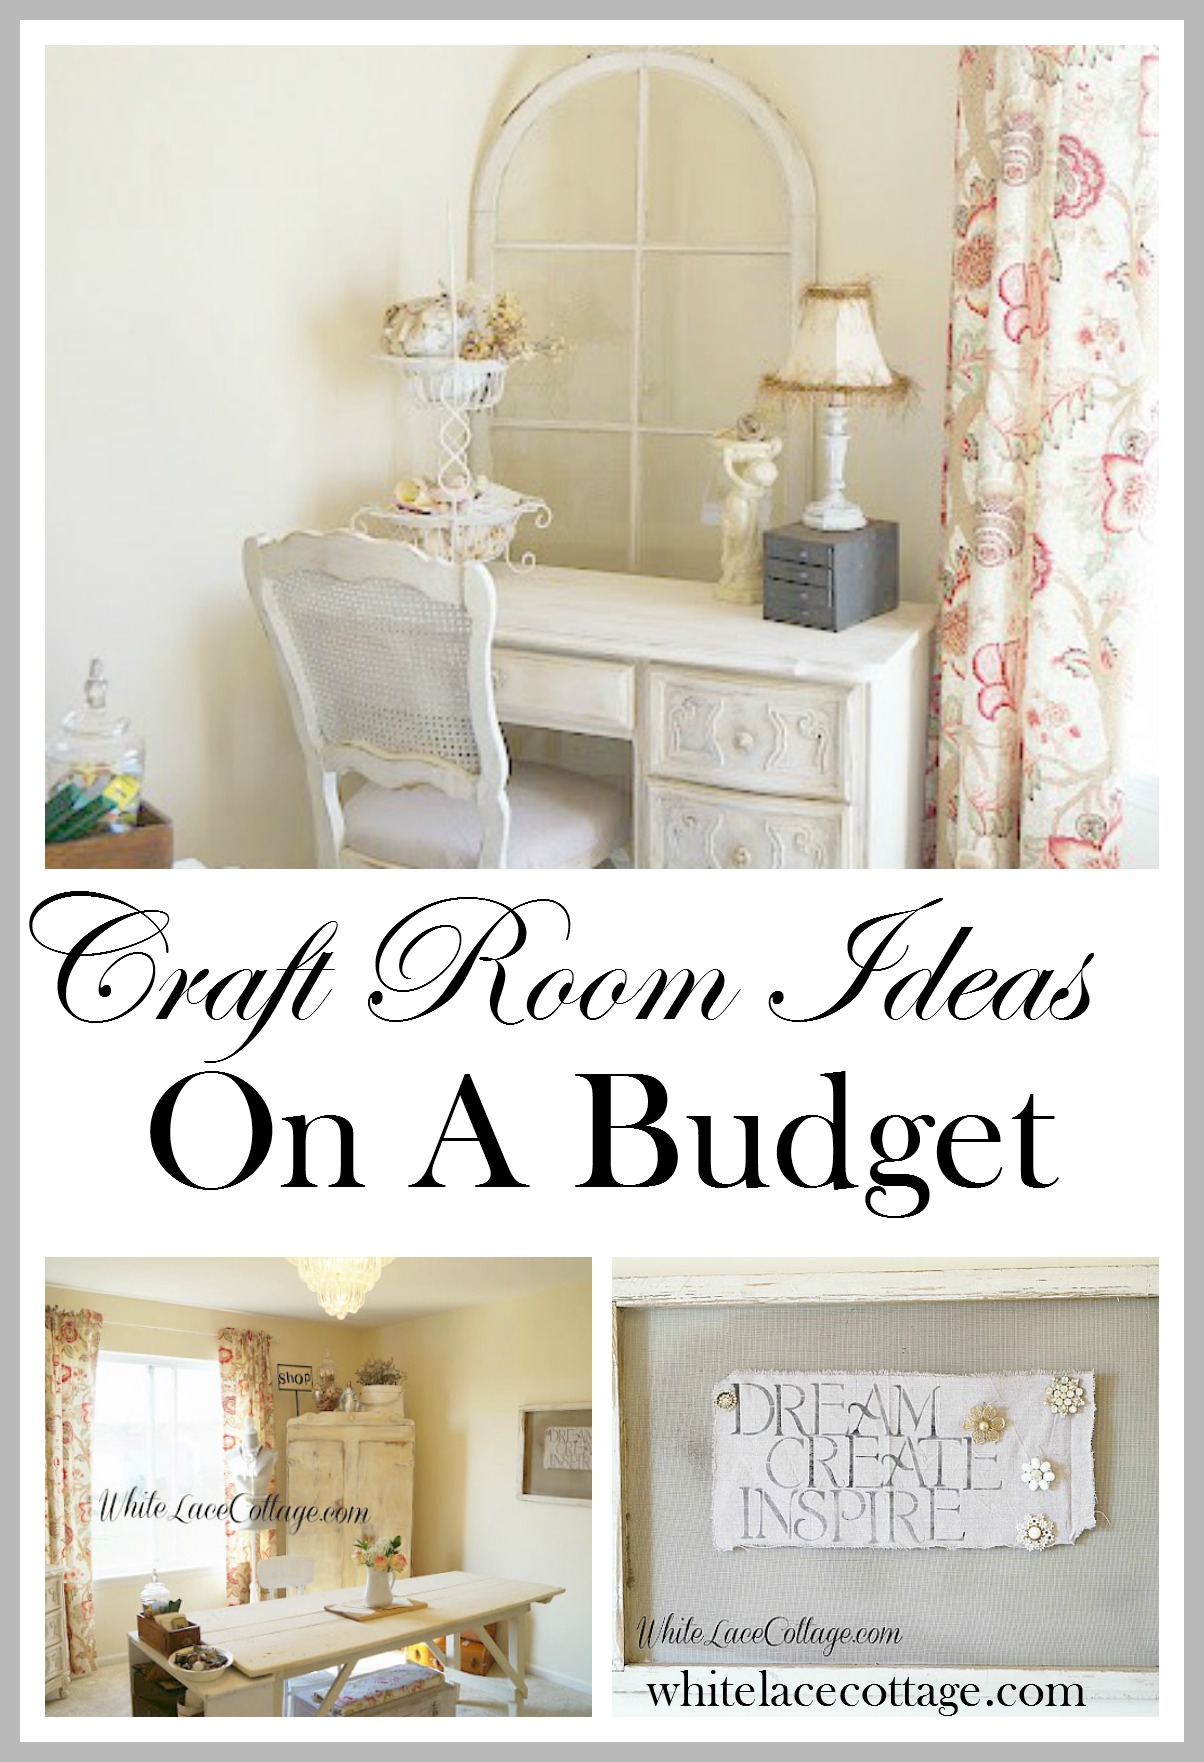 https://whitelacecottage.com/wp-content/uploads/2012/08/craft-room-ideas-on-a-budget.jpg